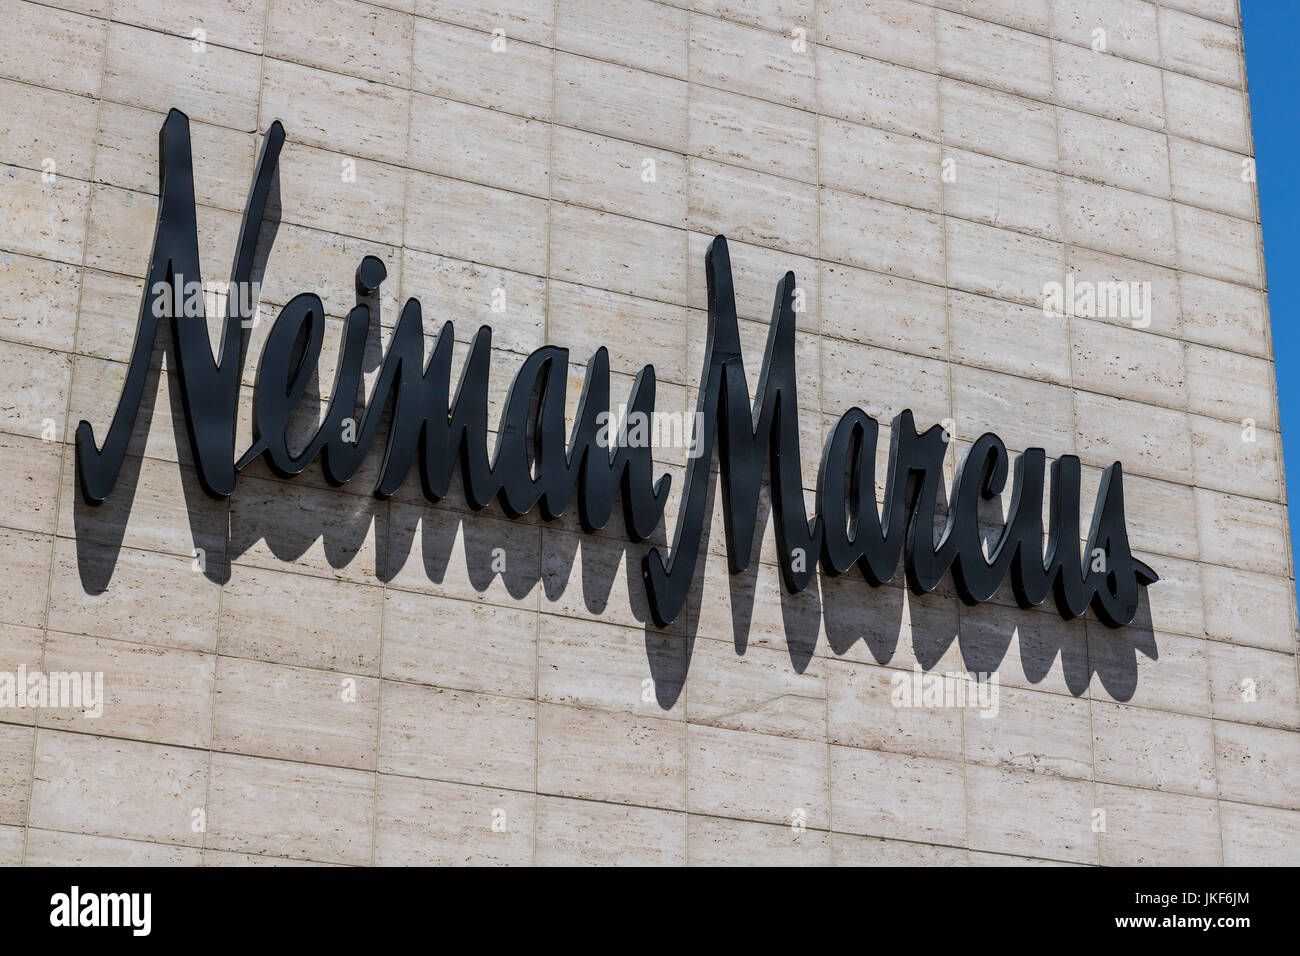 Neiman marcus logo hi-res stock photography and images - Alamy